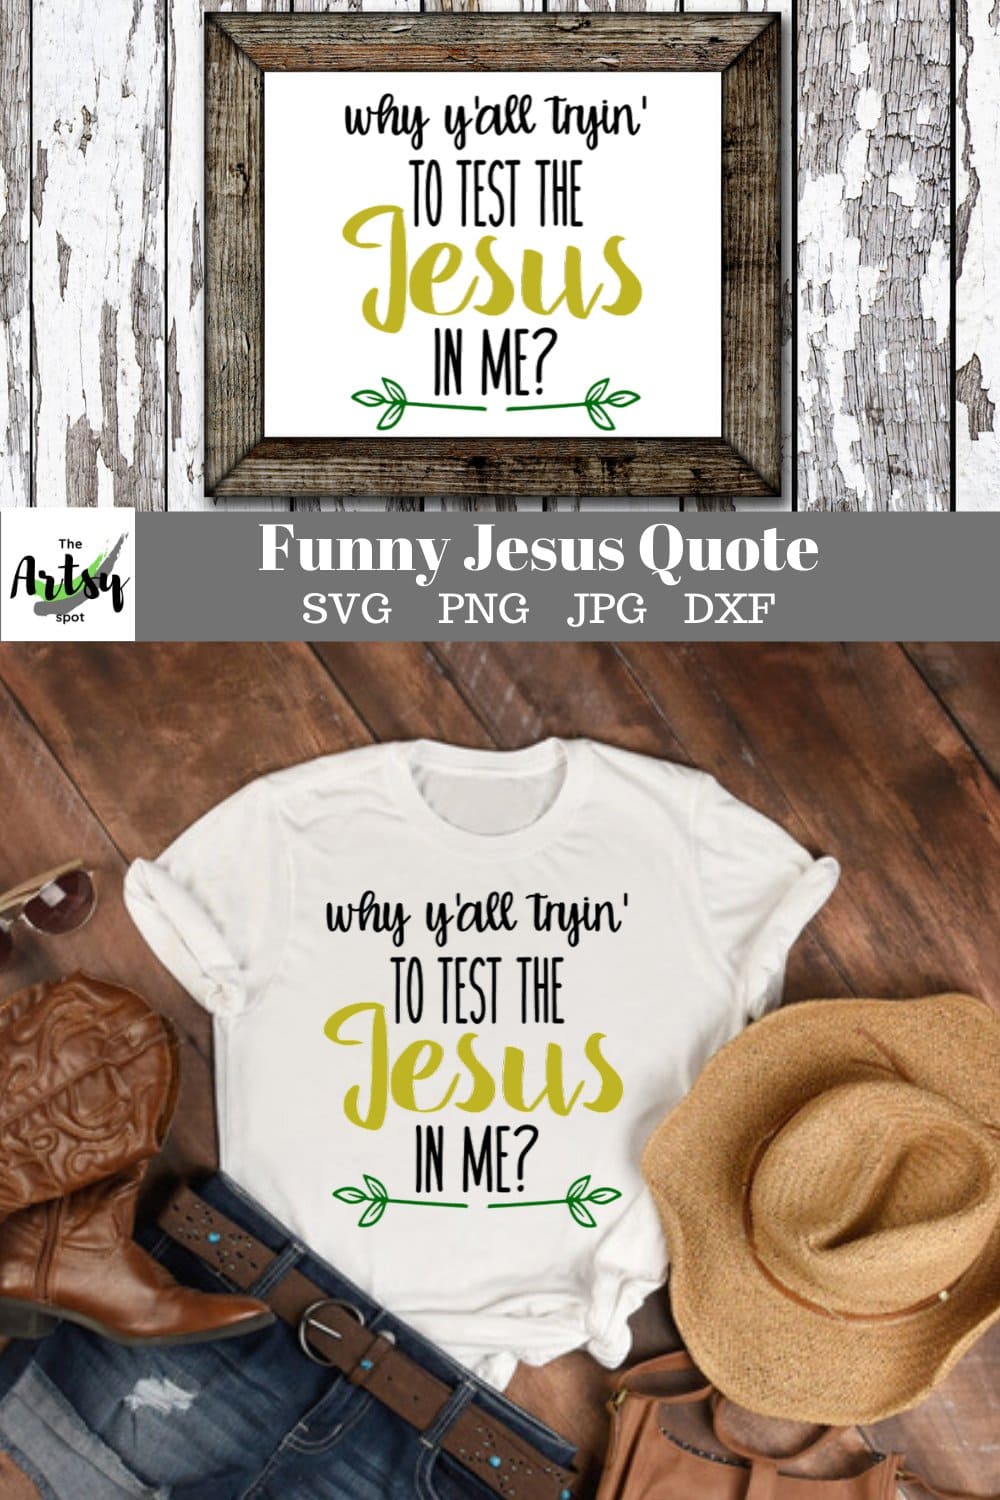 An inscription "Why Y'all Tryin' to Test the Jesus in Me, Funny Faith Quote" on a white T-shirt.